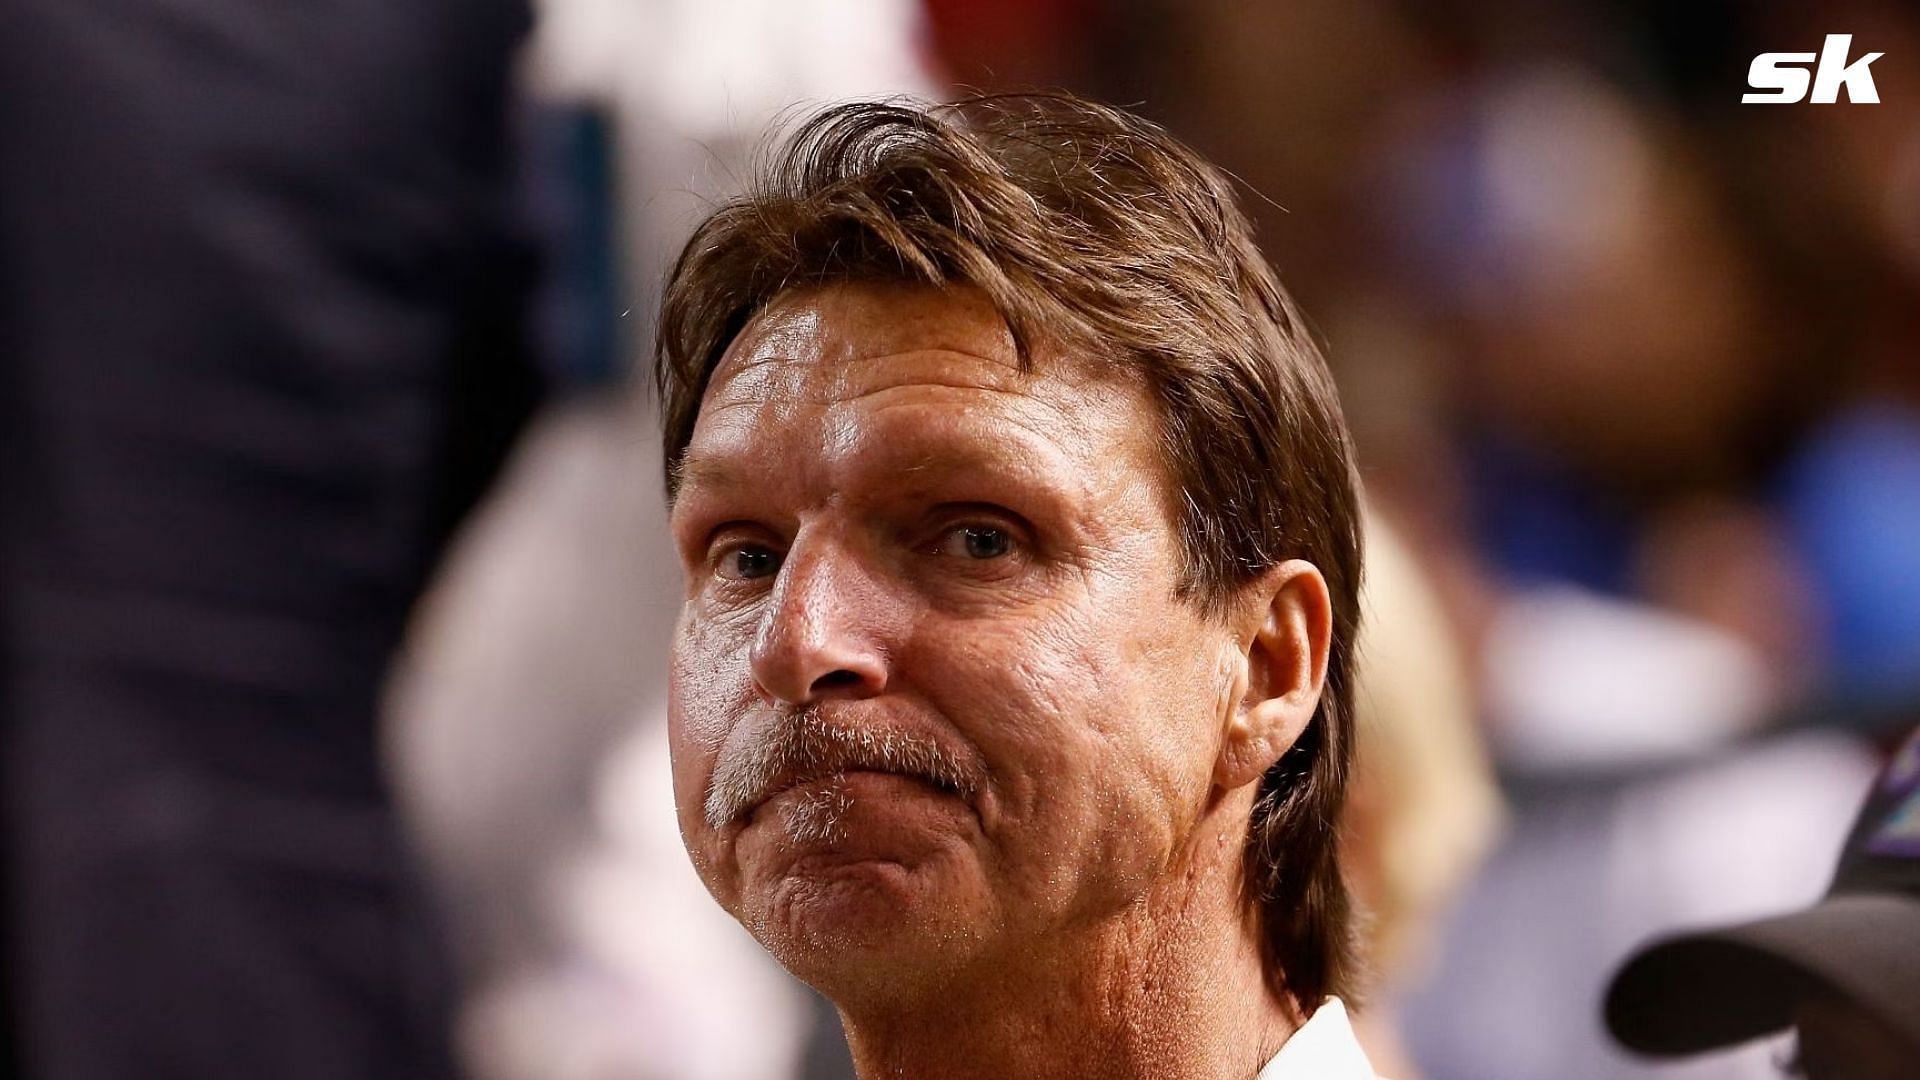 Randy Johnson Once Revealed He Doesnt Need A Gun To Combat Intruders